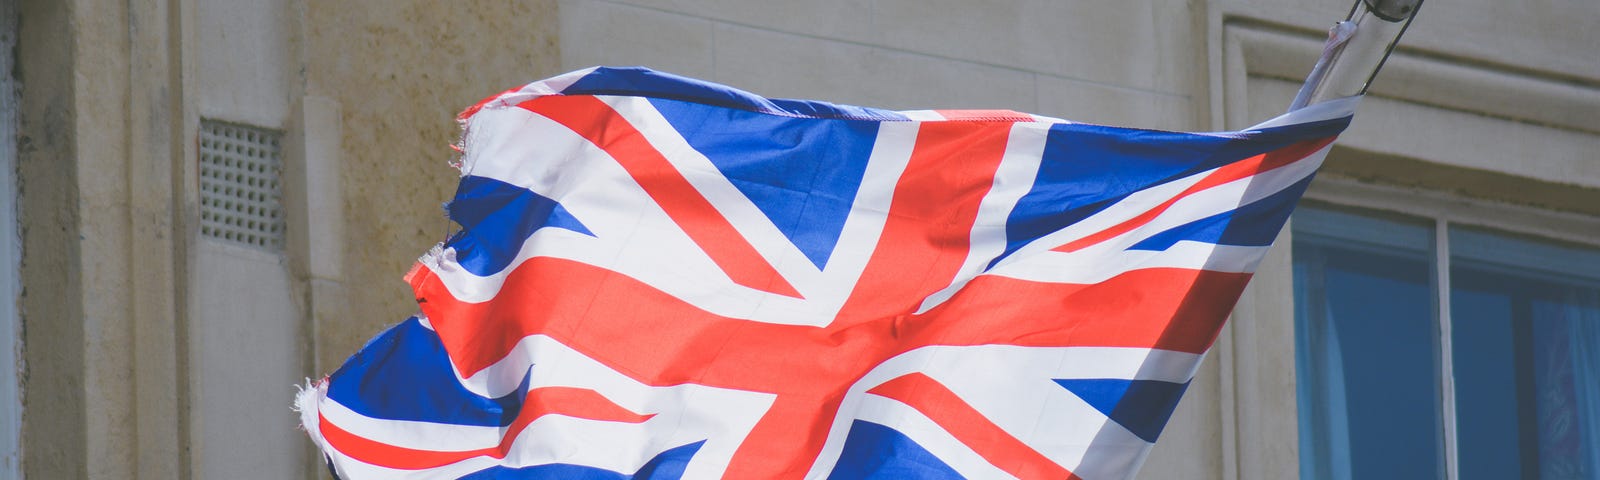 A picture of the British flag blowing in the wind.